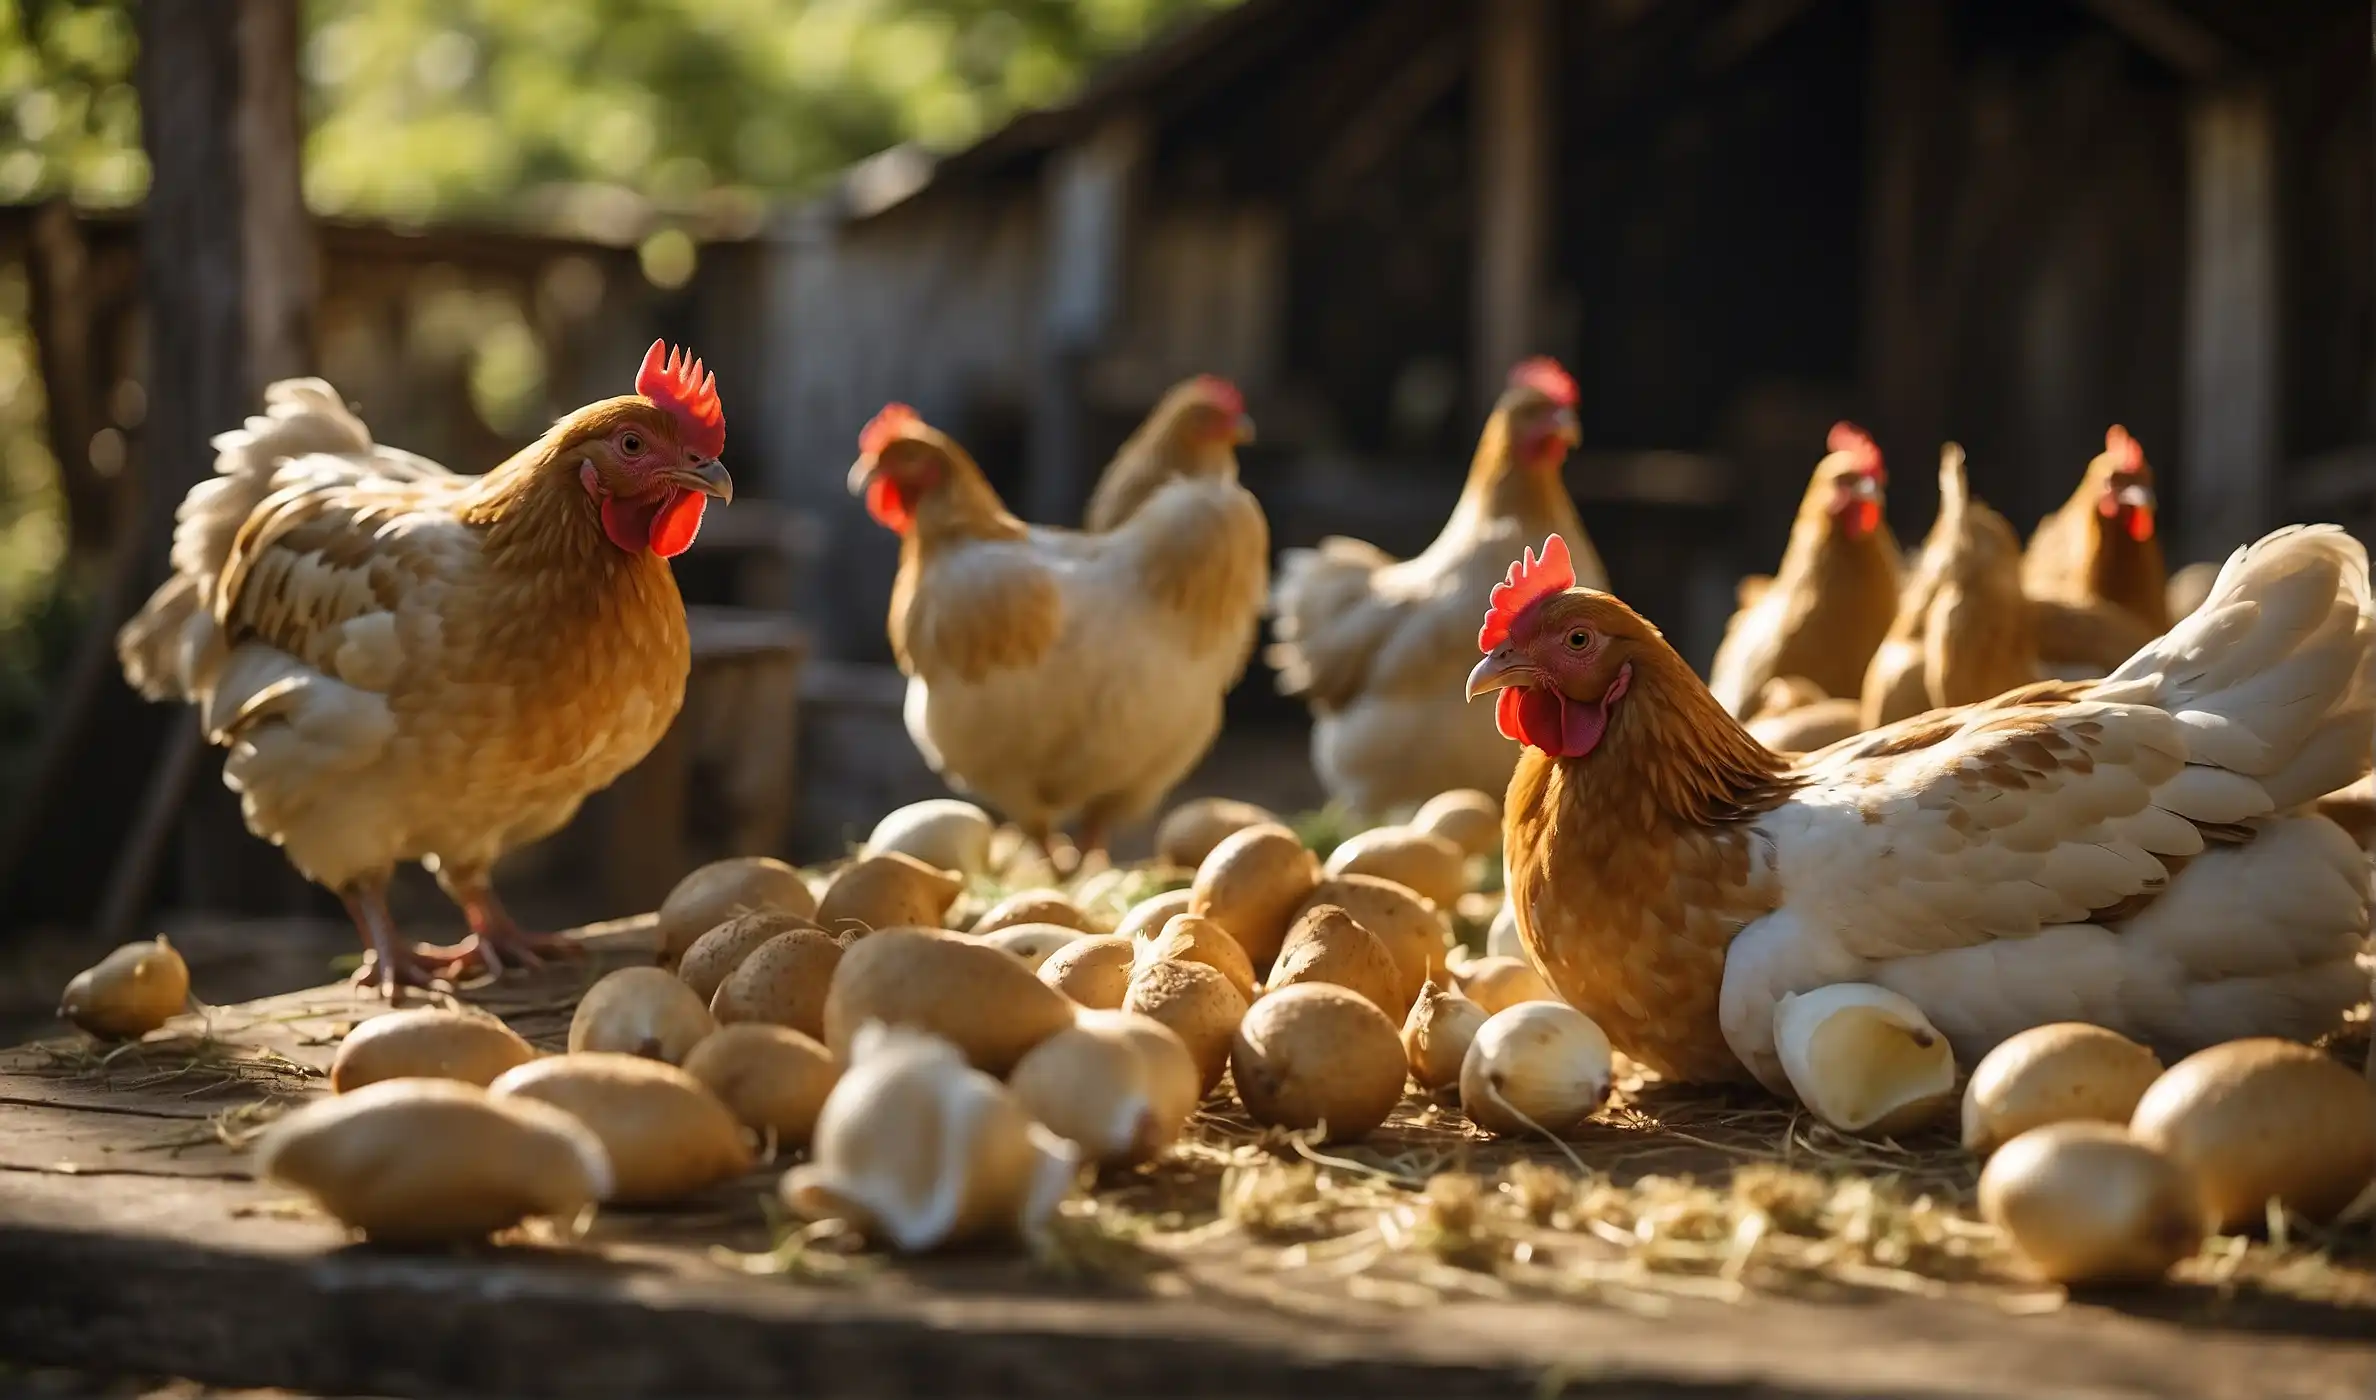 Can Chickens Eat Garlic Bread? Surprising Facts